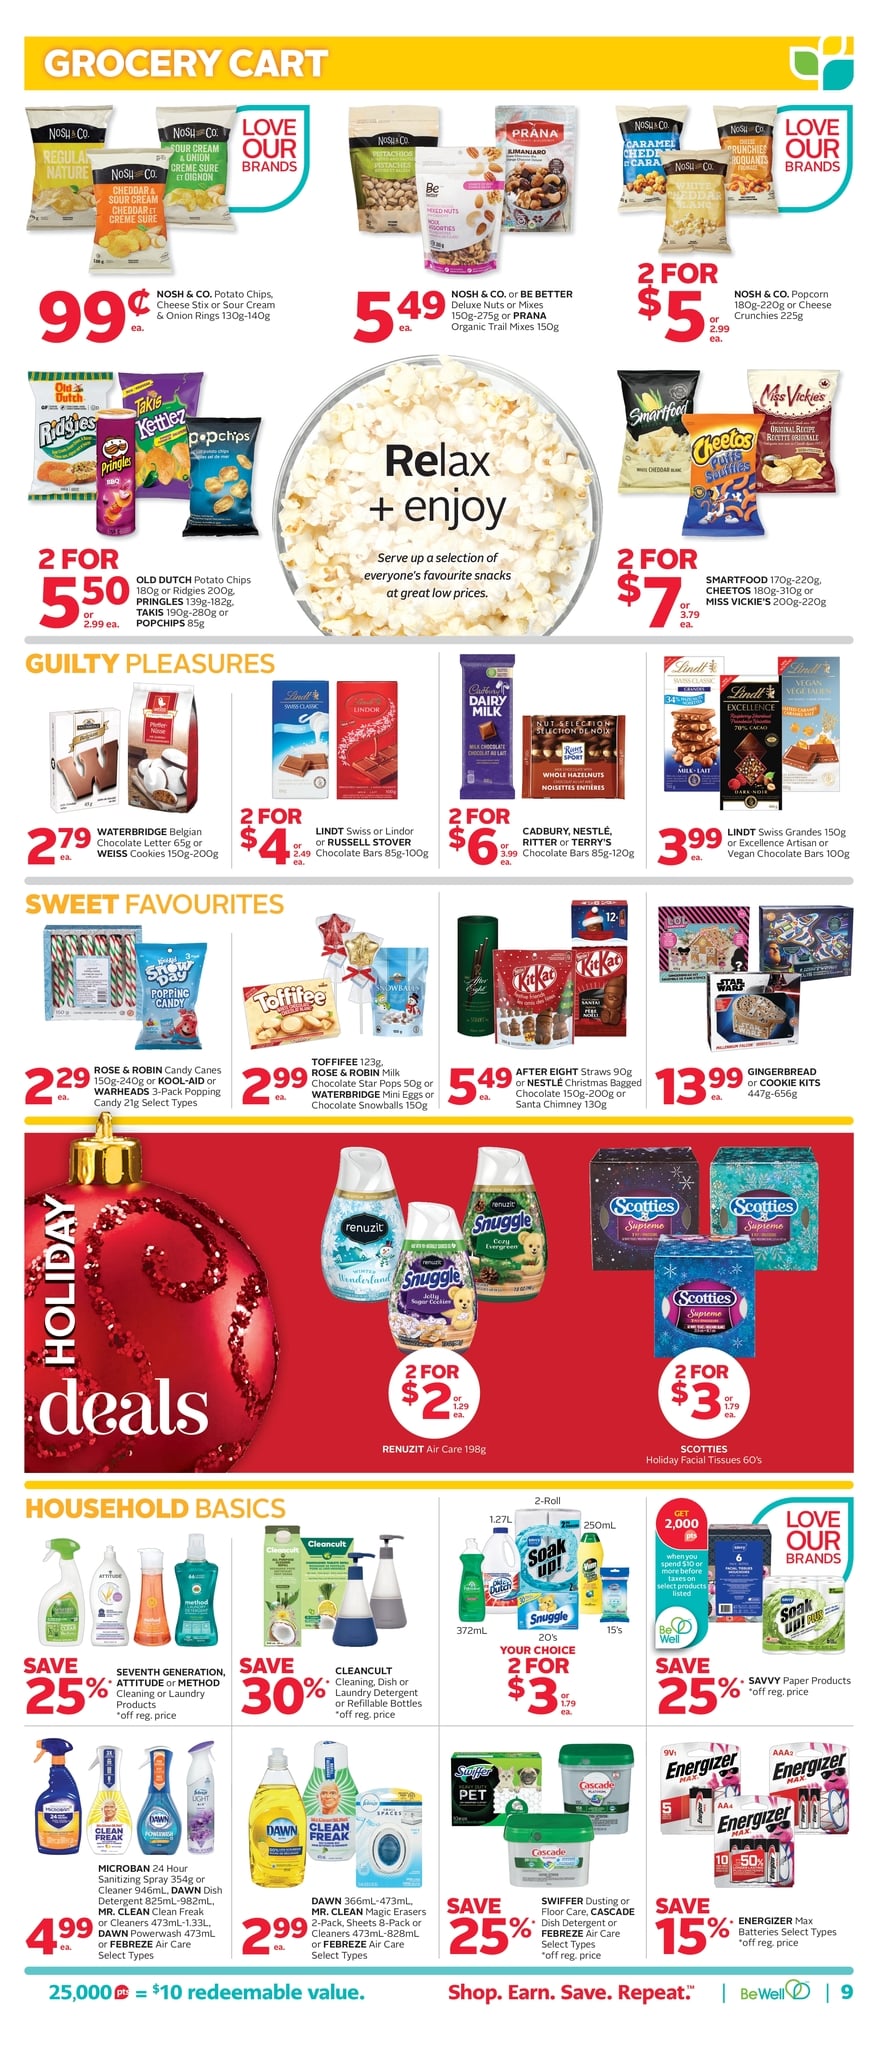 Rexall - Weekly Flyer Specials - Black Friday Deals - Page 17